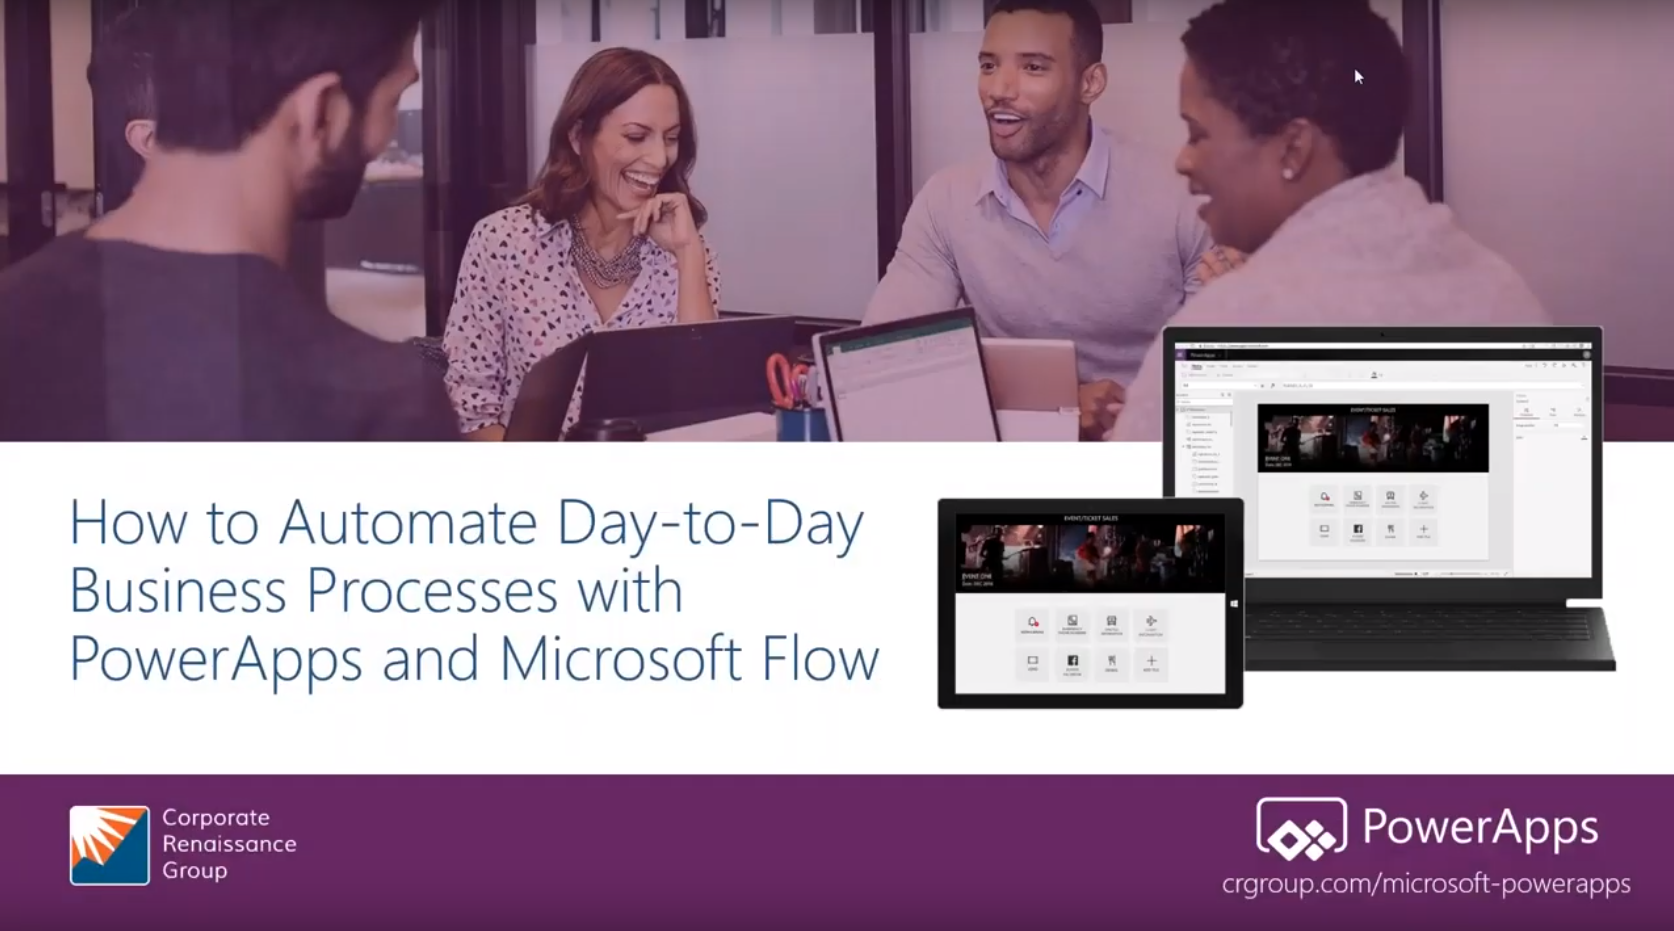 Automate Day-to-Day Business Processes video thumbnail